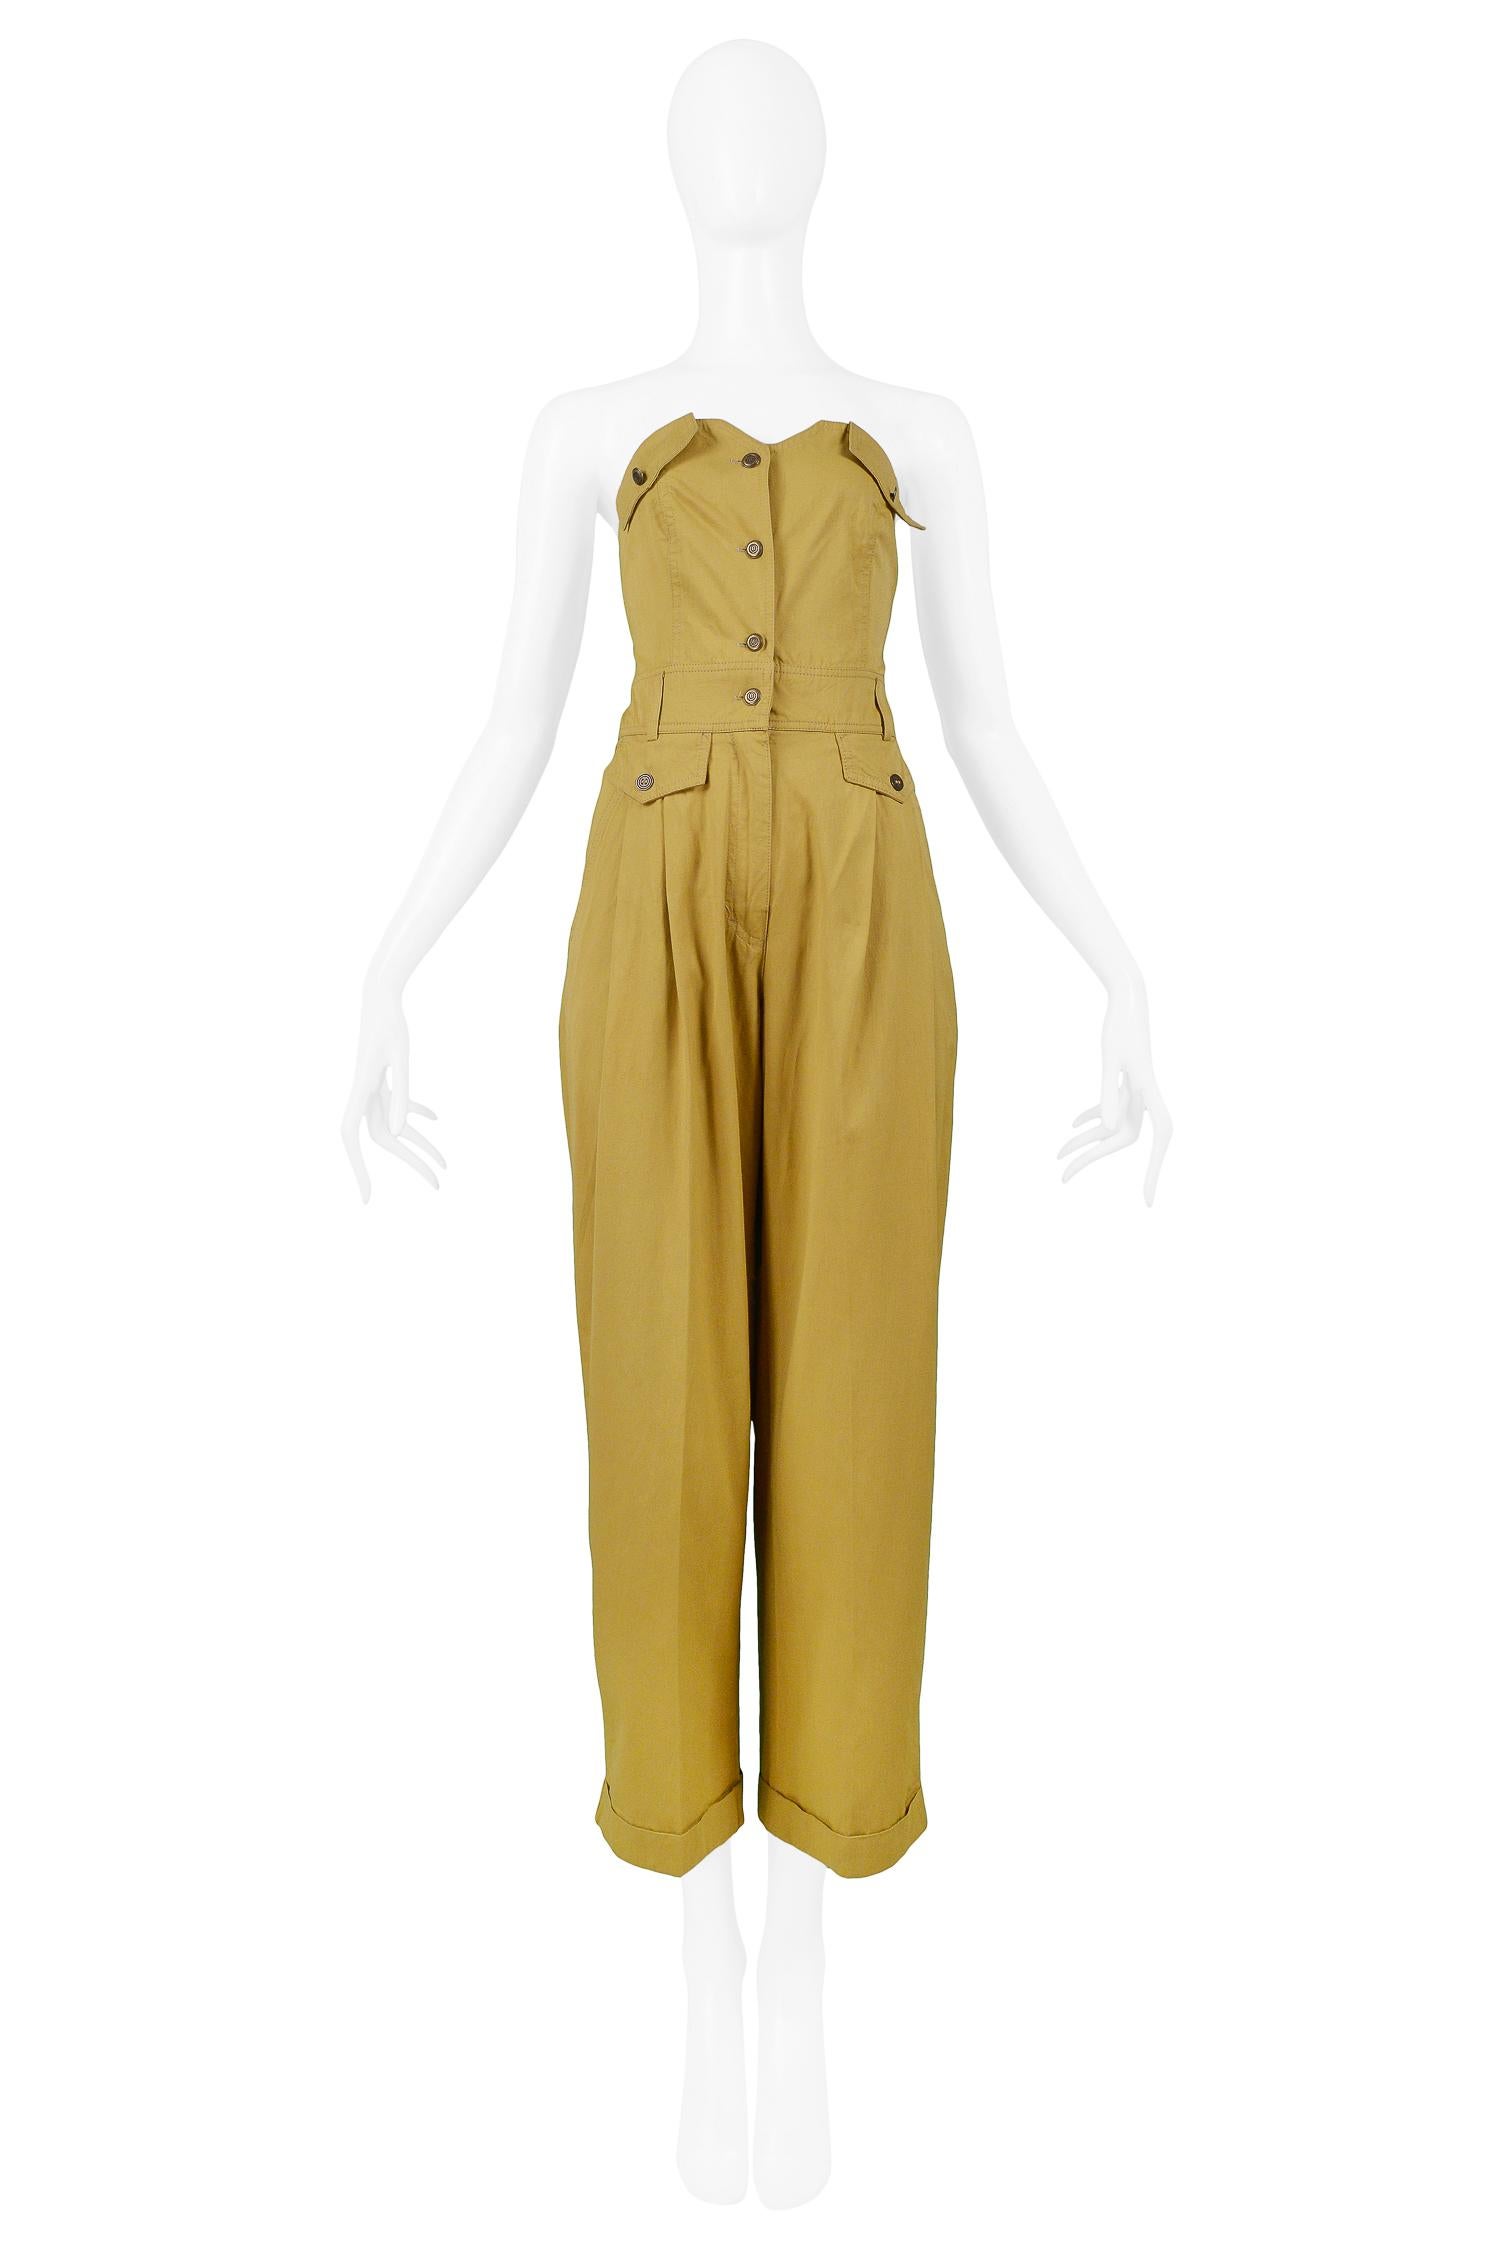 Resurrection Vintage is excited to offer a vintage Byblos khaki cotton strapless jumpsuit with button front, pocket details, pleated pants, and  cuff hems. Circa, 1992. 

Byblos
Designed by Alan Cleaver and Keith Varty
Size 42
Viscose Cotton